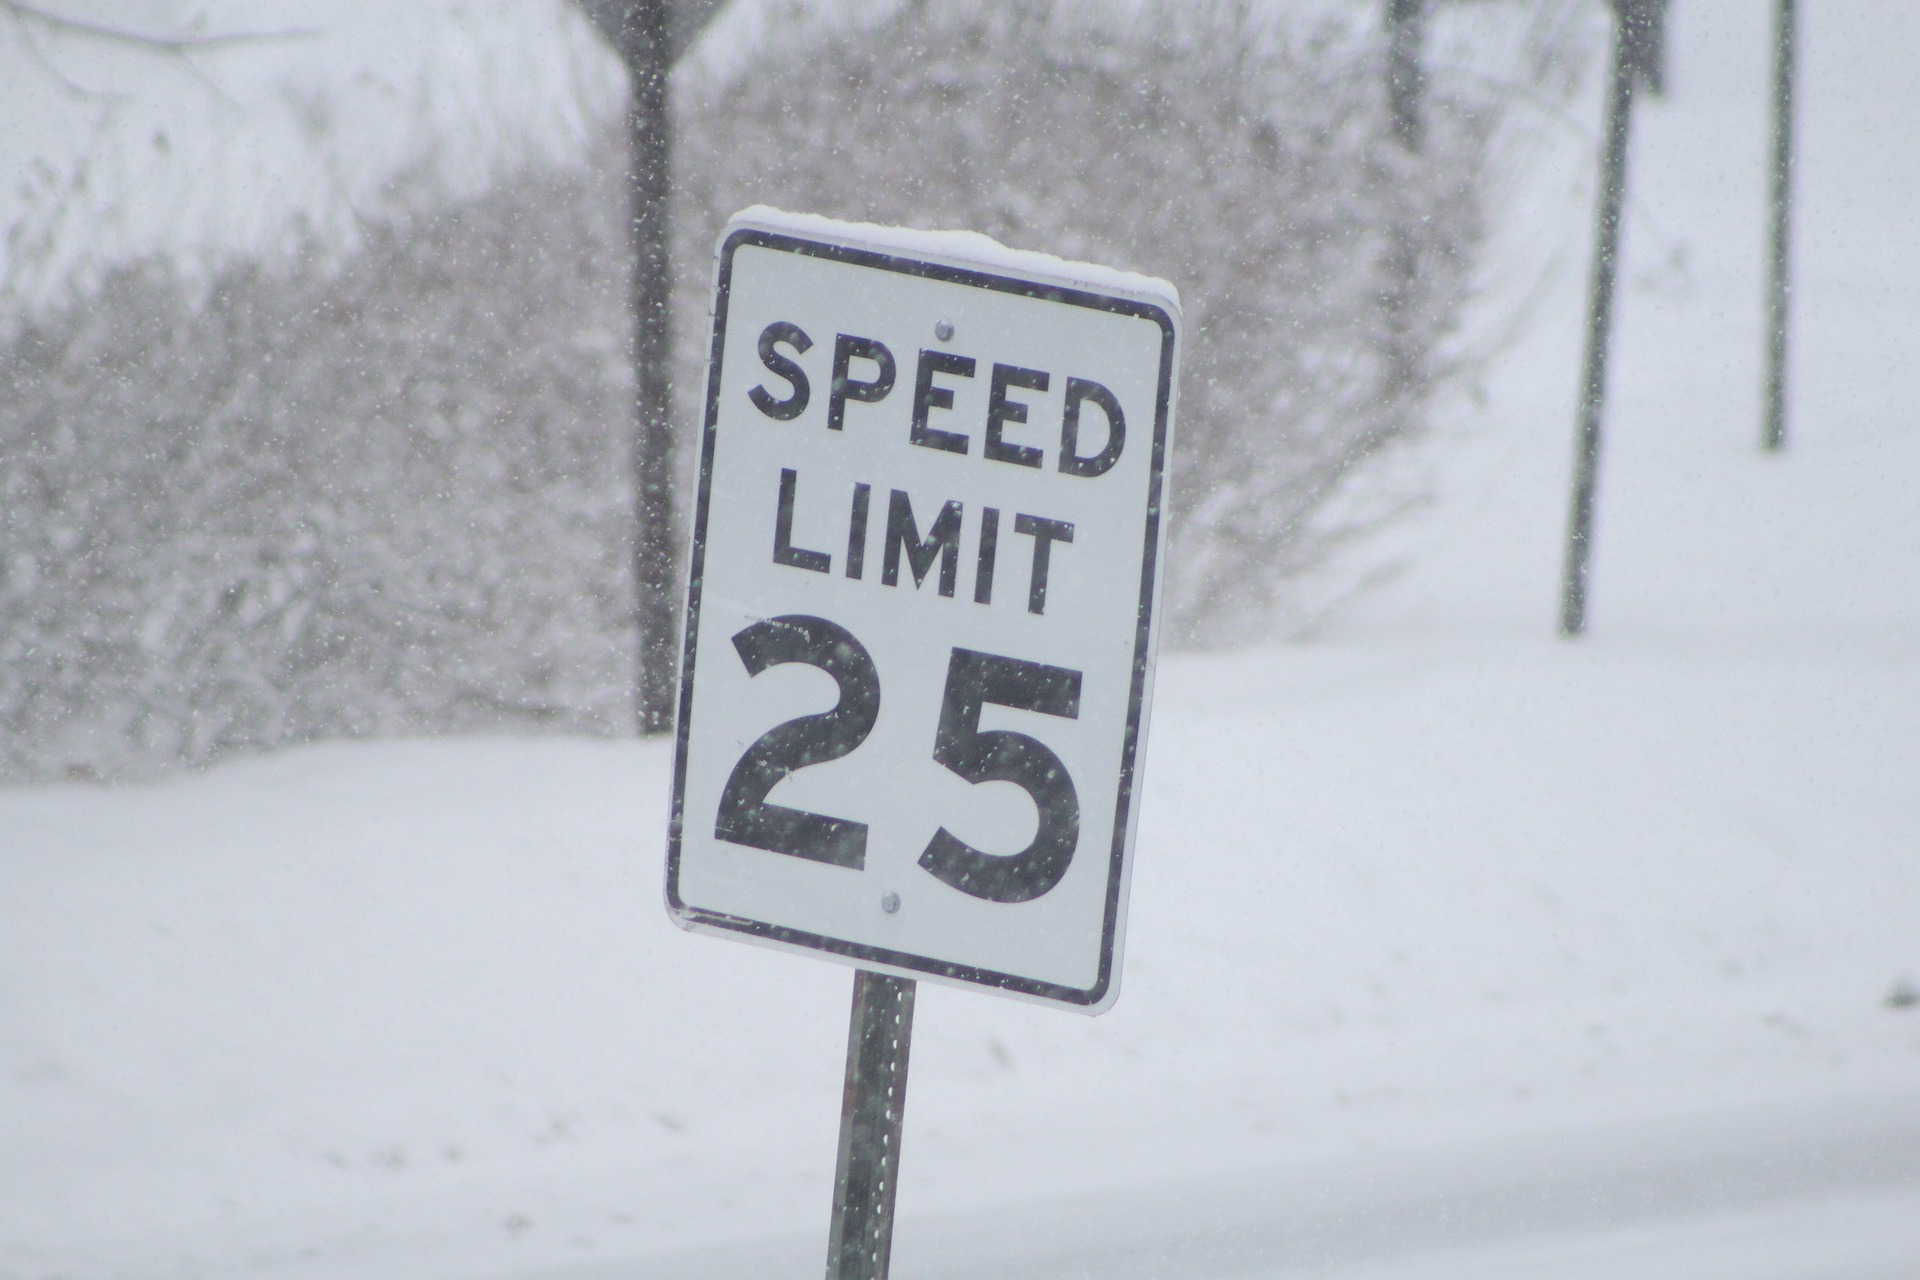 Speed limit sign surrounded by snow